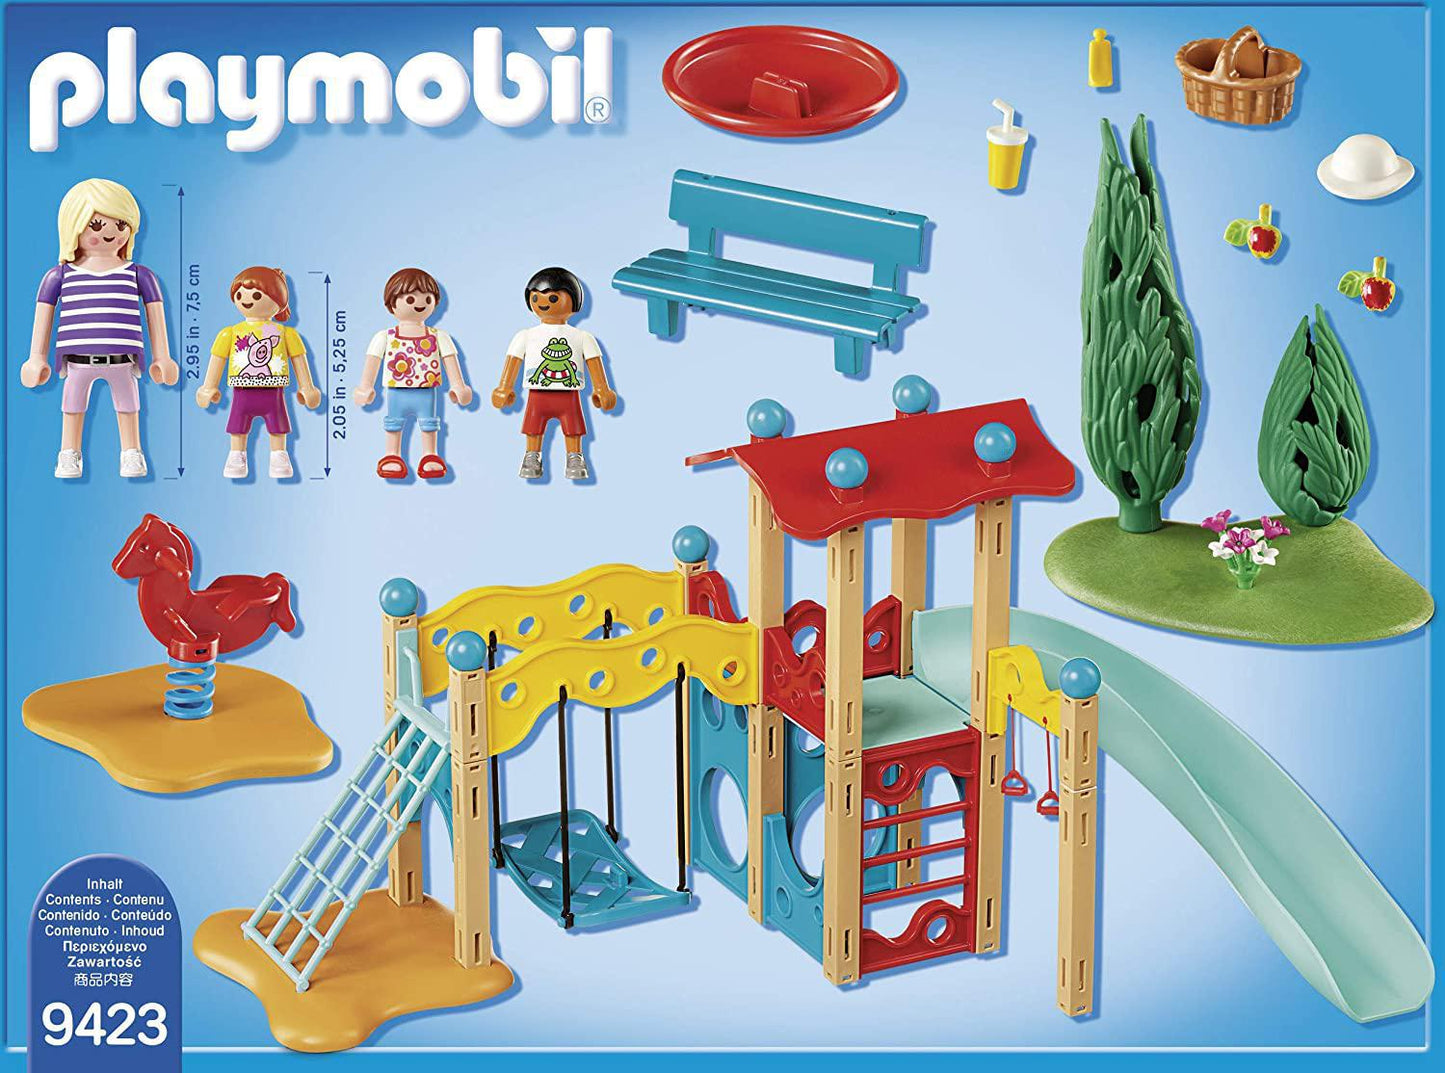 PLAYMOBIL Park Playground - Feature play tower with slide, swing, climbing net, rock wall, and gymnastics rings